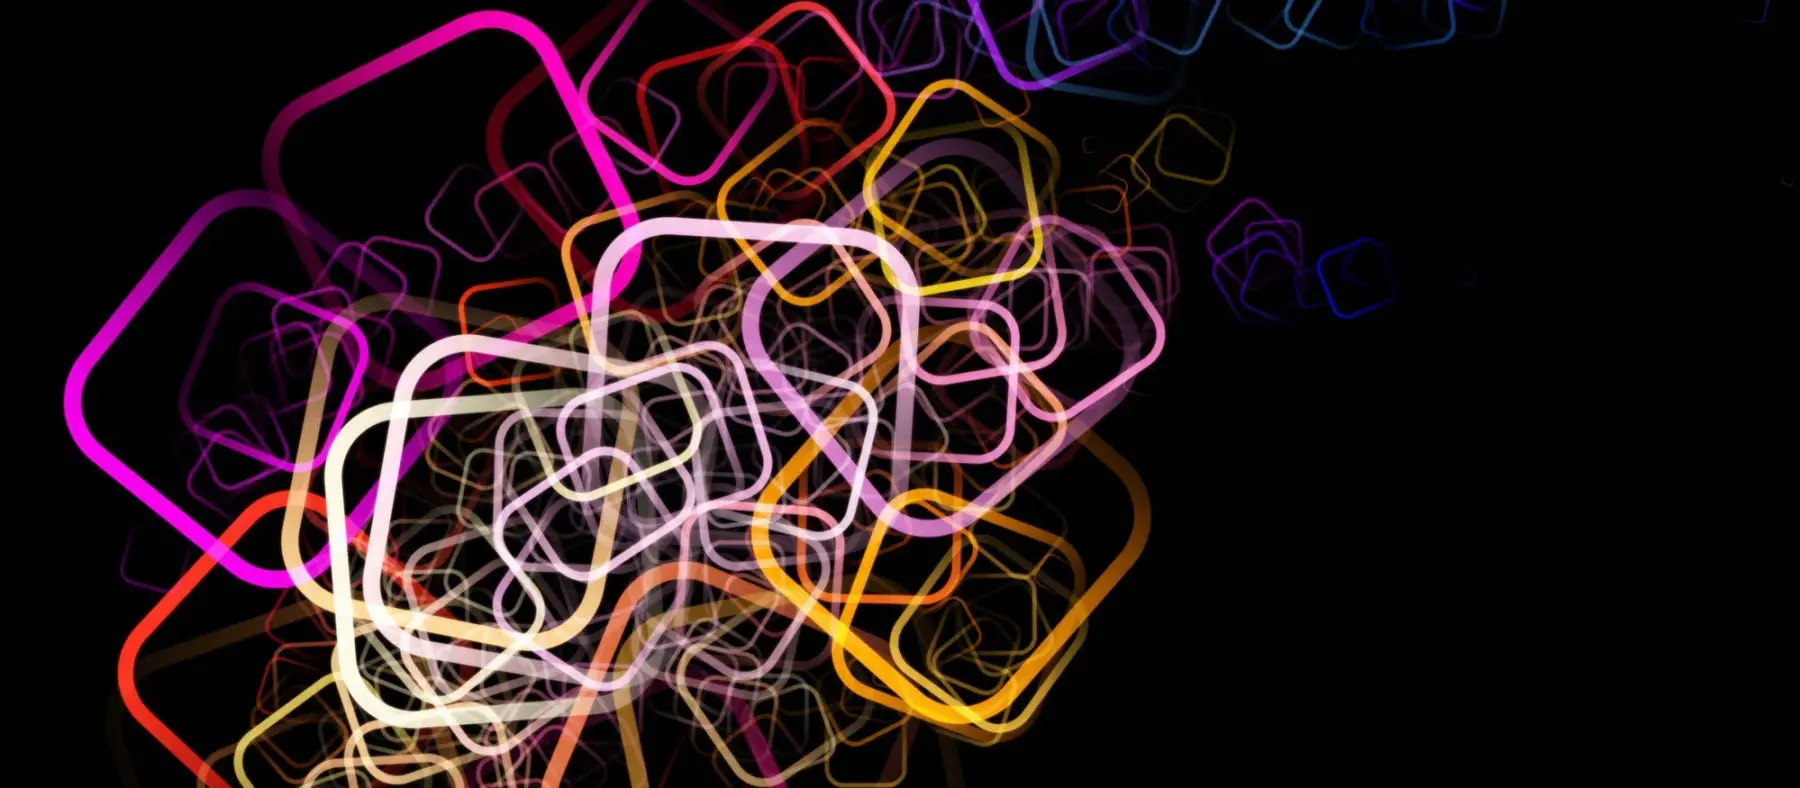 Abstract colored designs on black.